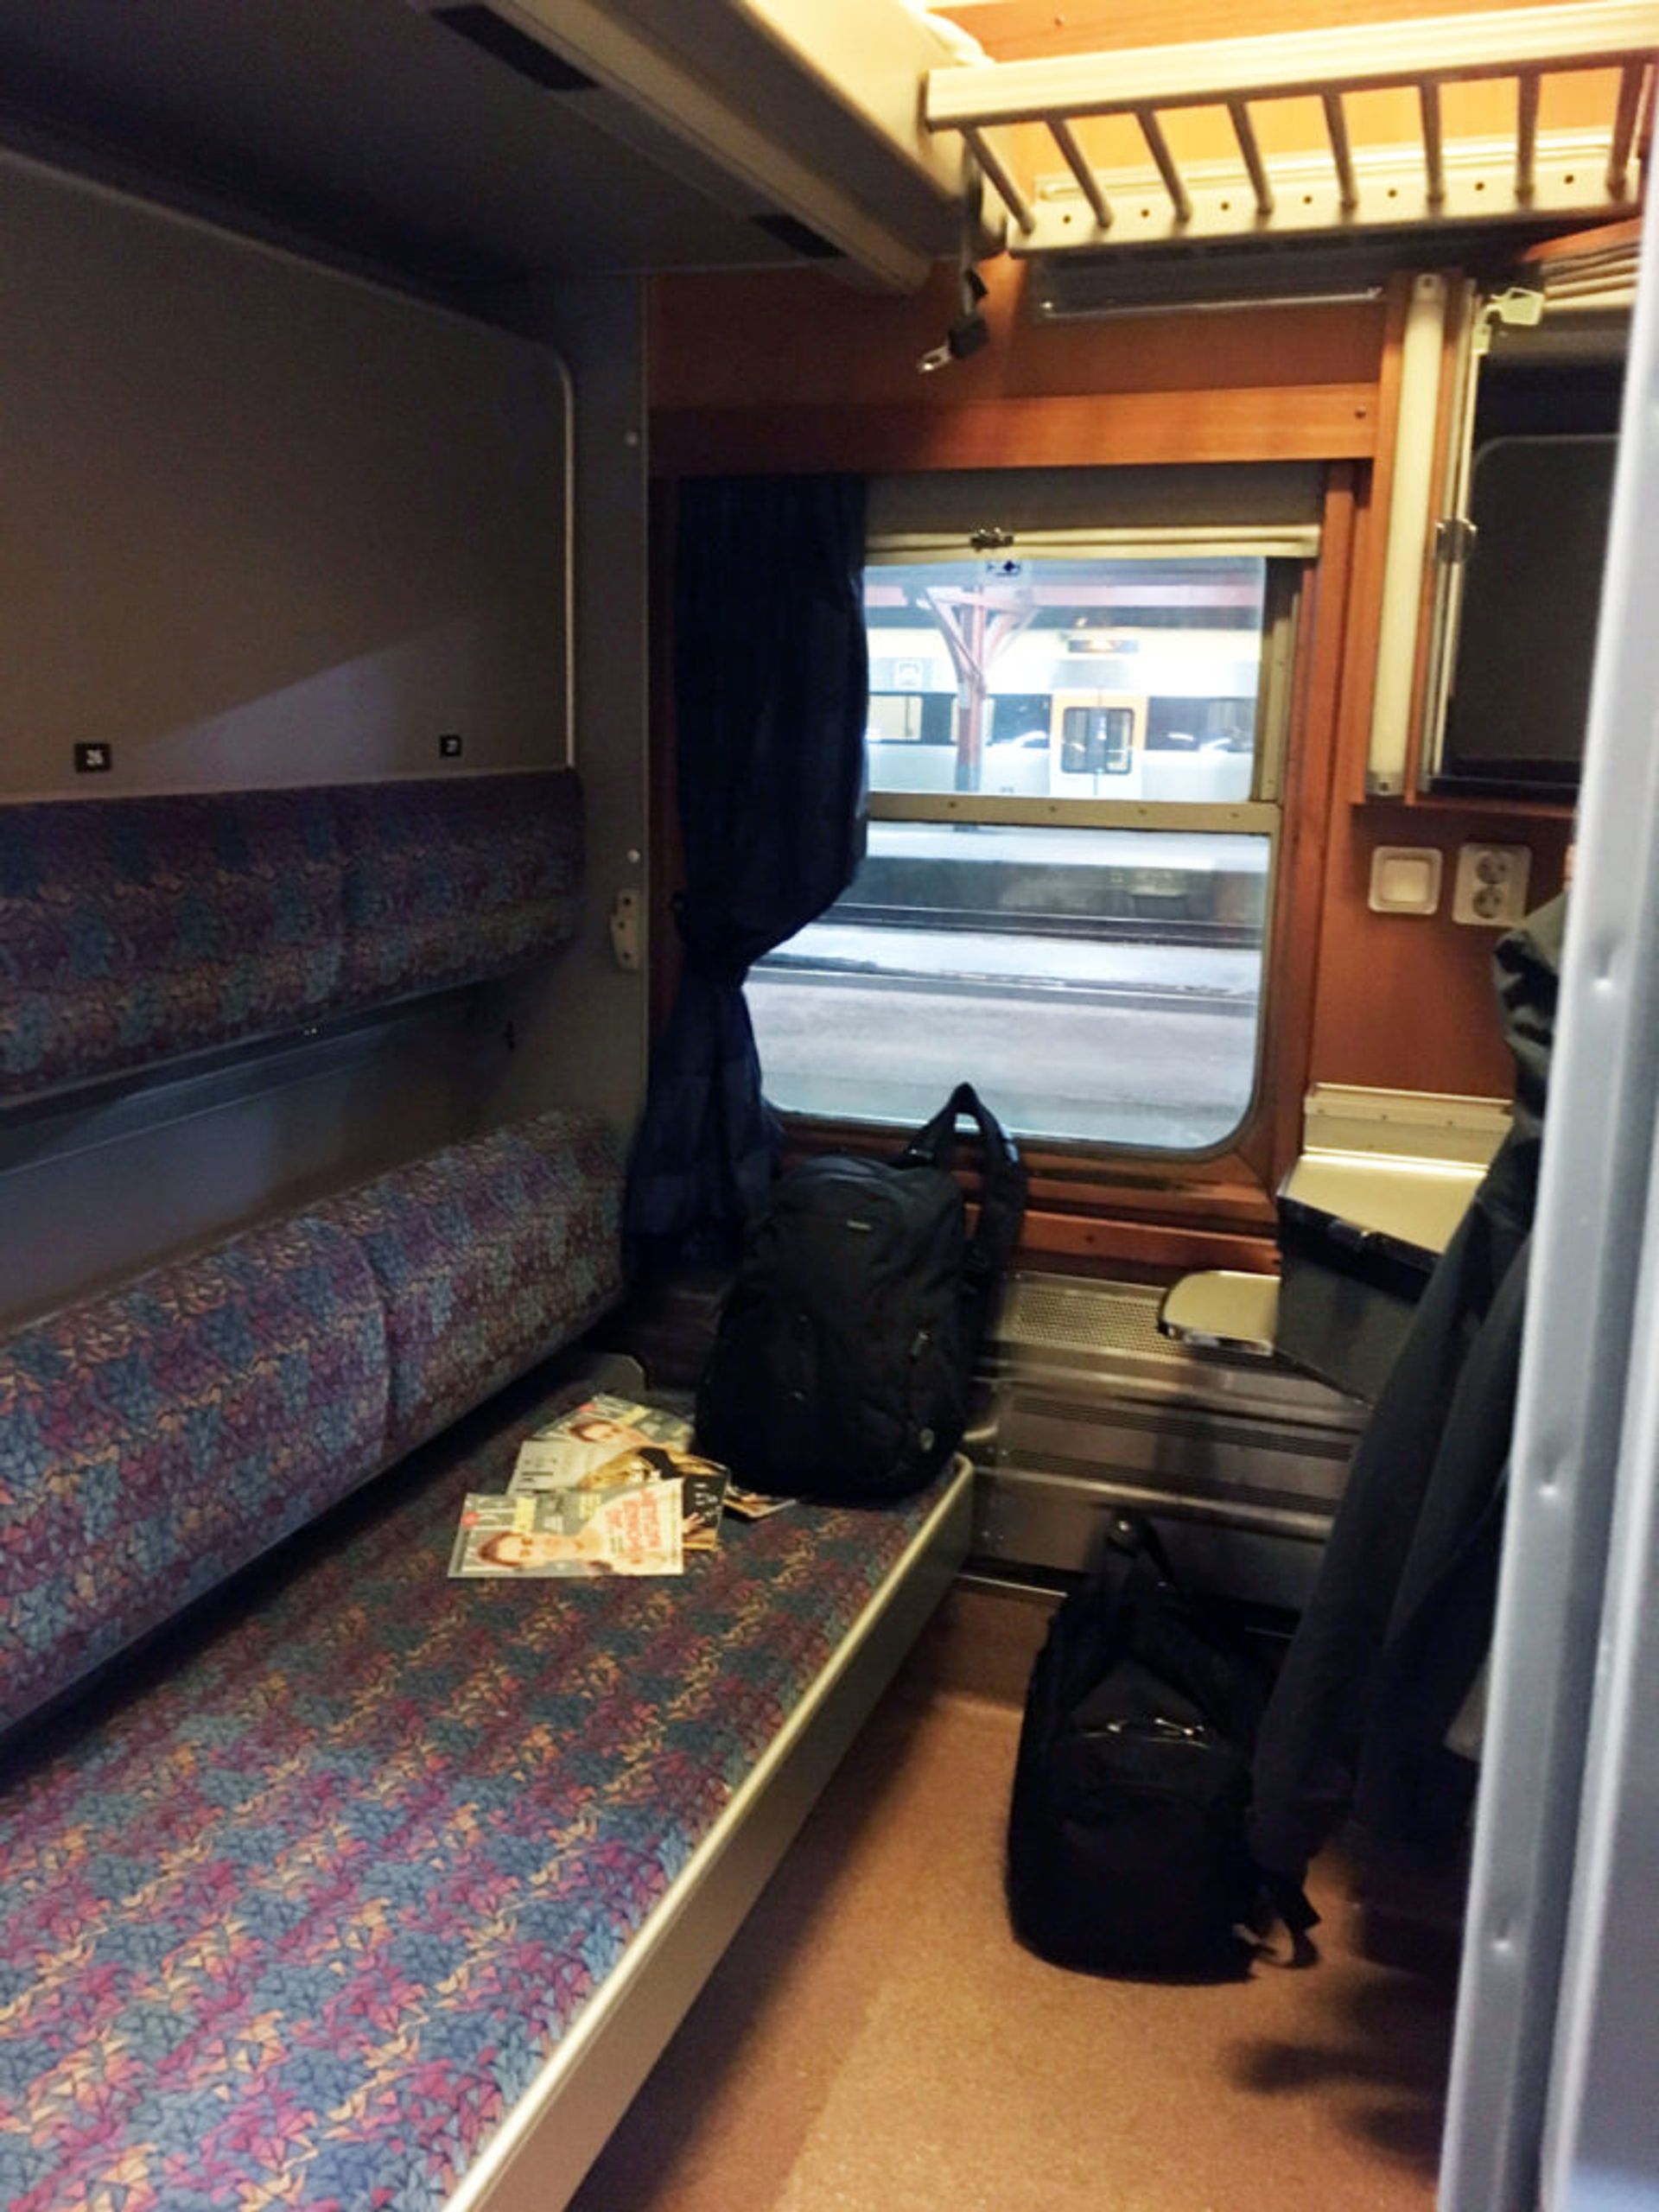 Small cabin at a sleeper train. You can see a colourful seat, a small table and a small window. 